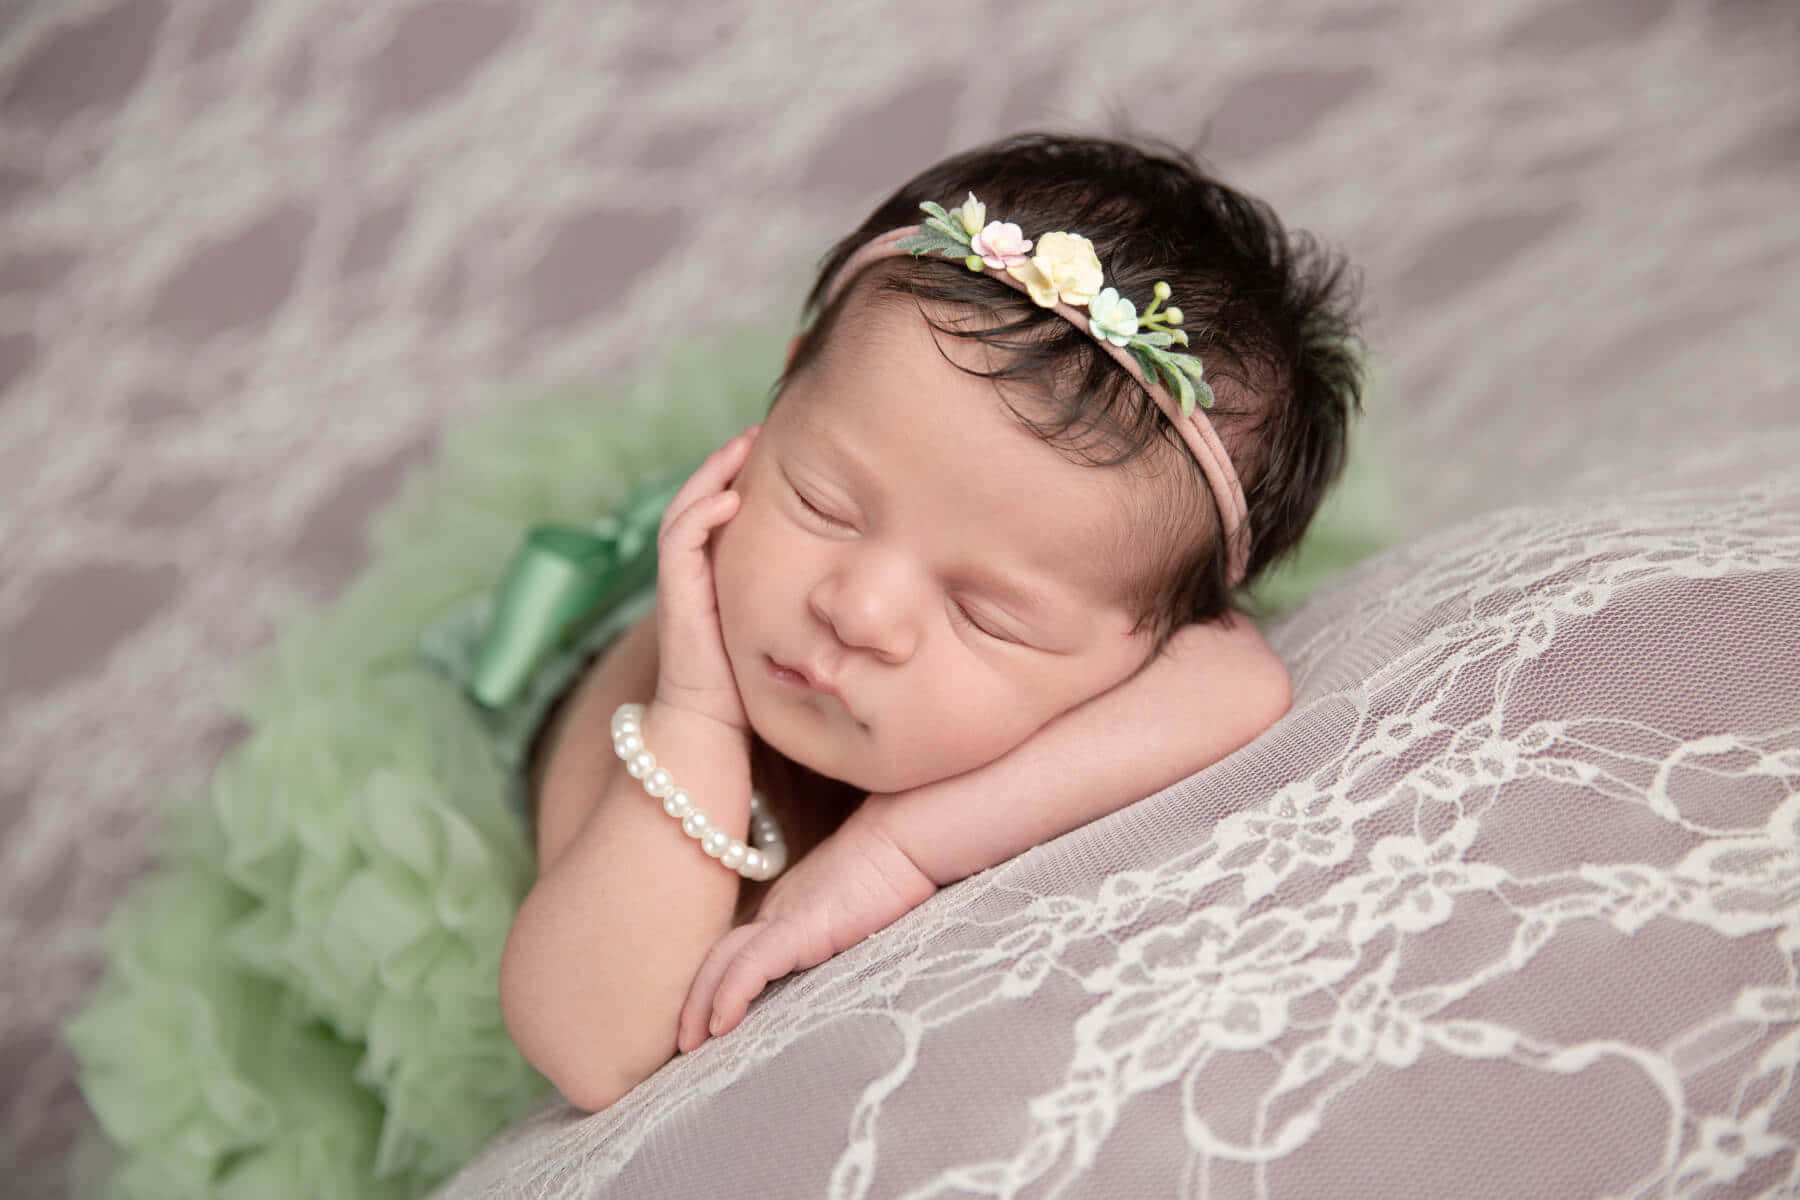 A Baby Girl In Green Tutu Laying On A White Blanket